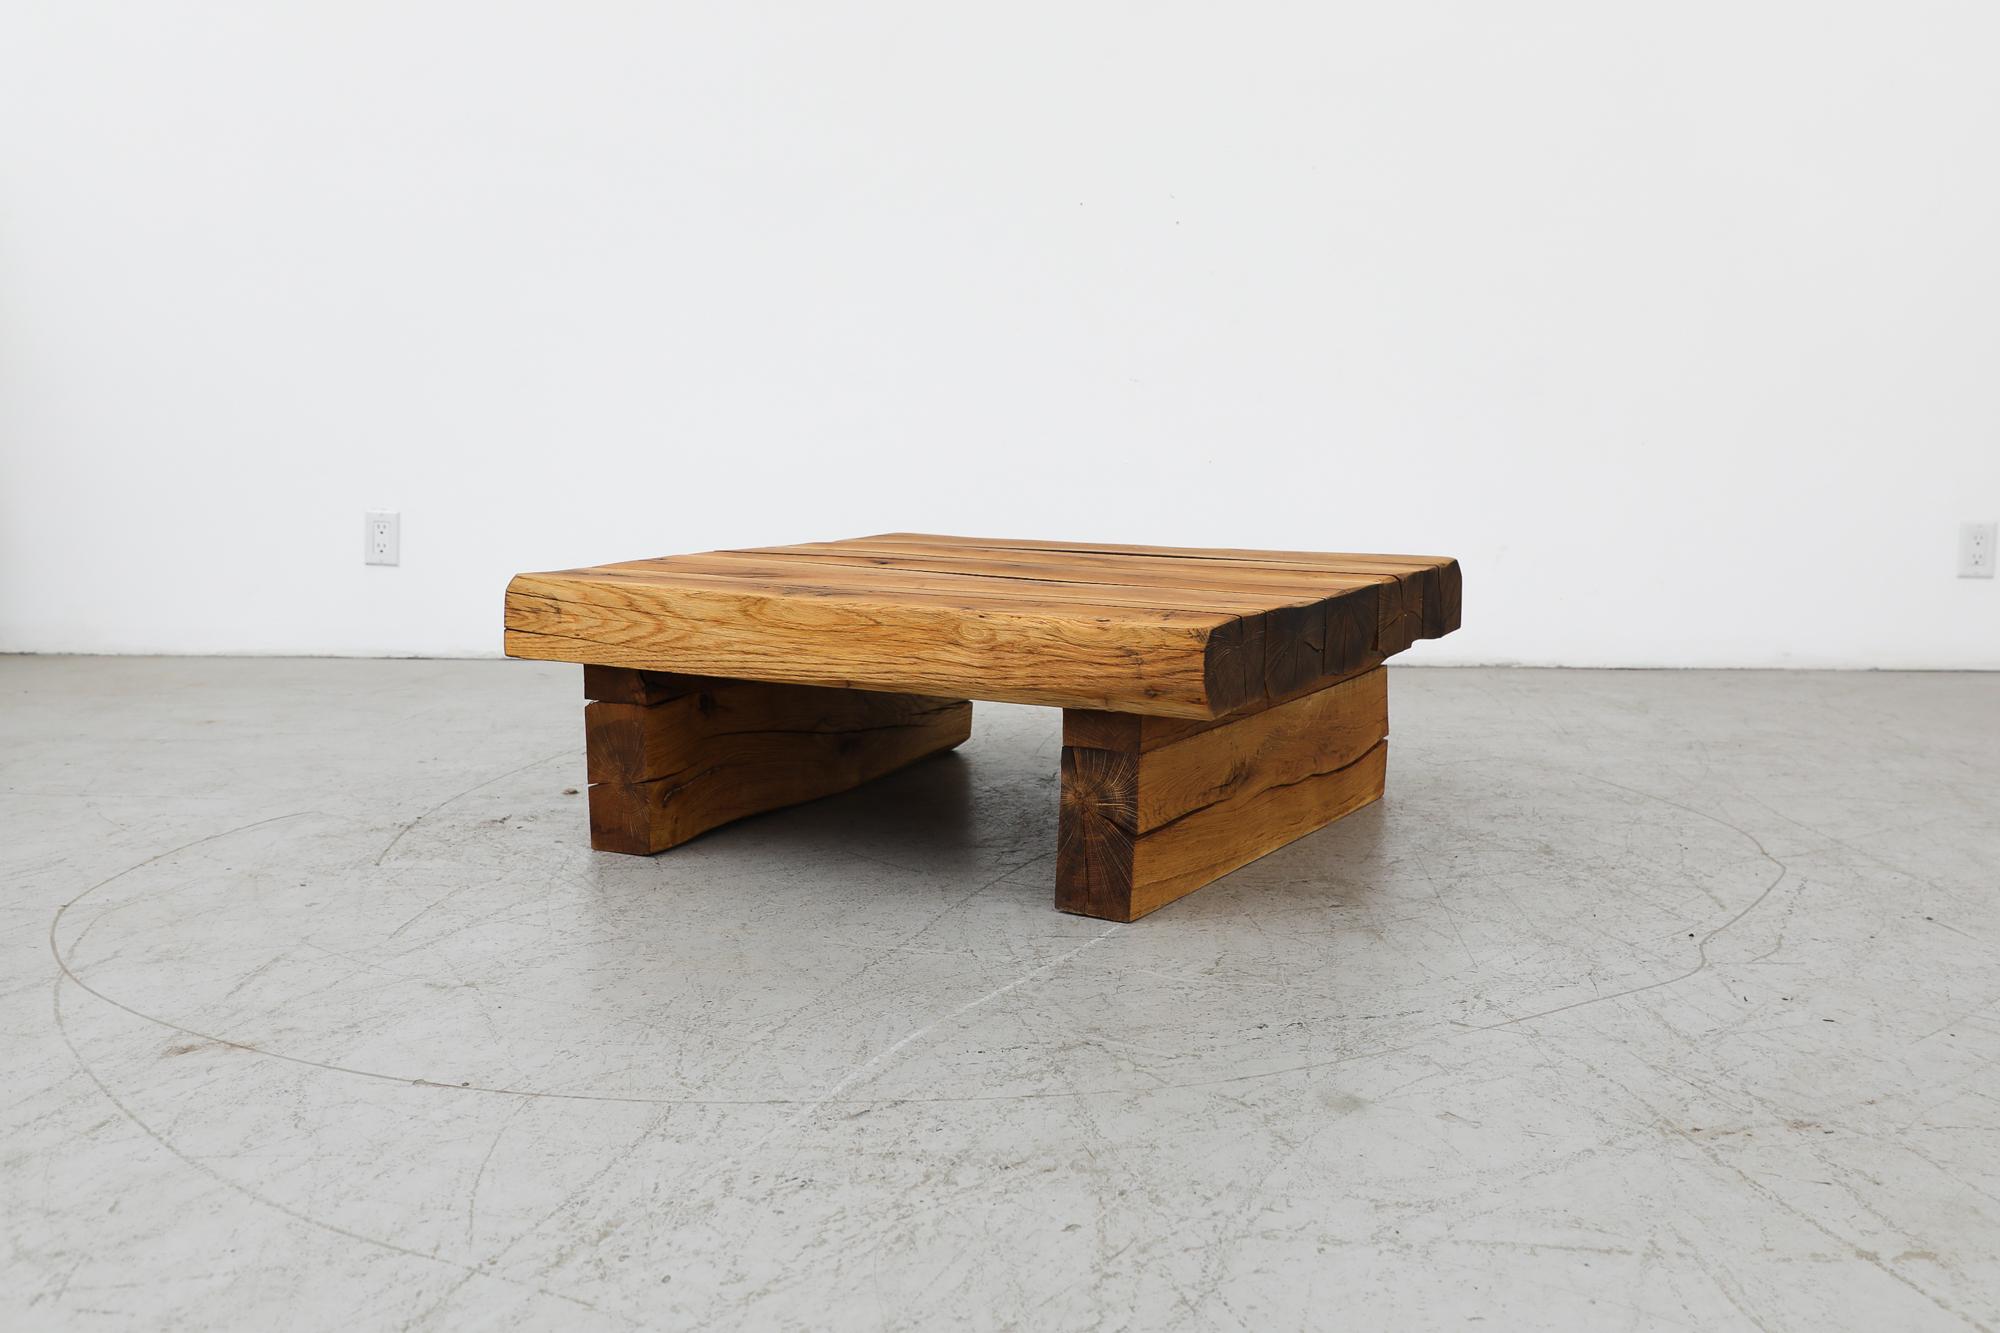 Mid-Century, heavy solid oak, square coffee table with clean boxy design and thick rectangular legs. This table is in original condition with visible signs of wear consistent with its age and use.